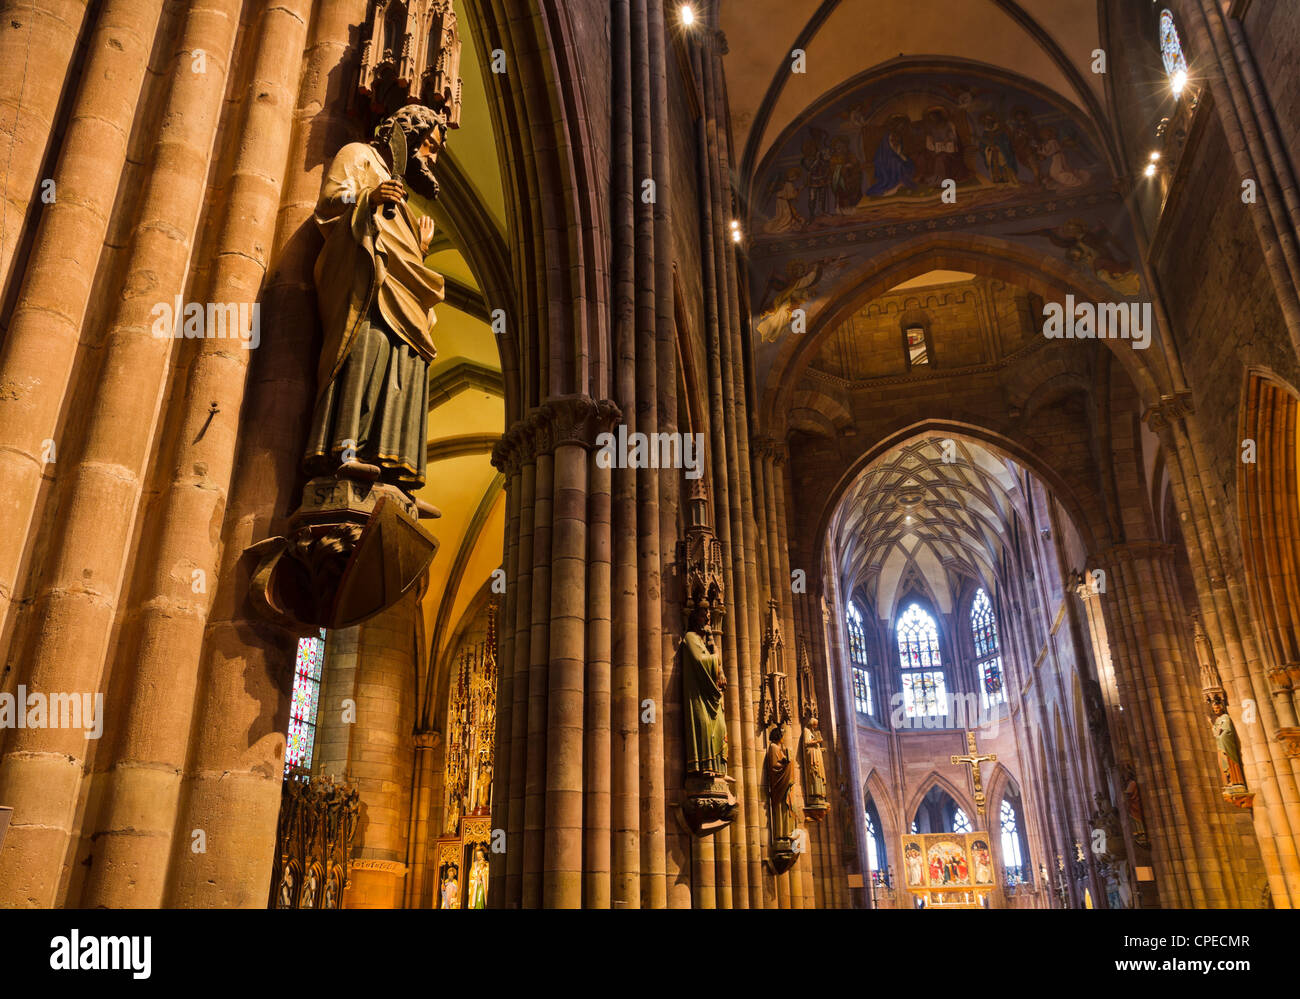 Interior with high ceilings, pillars, stained glass windows, carved decoration figures of gothic Muenster, Freiburg Stock Photo